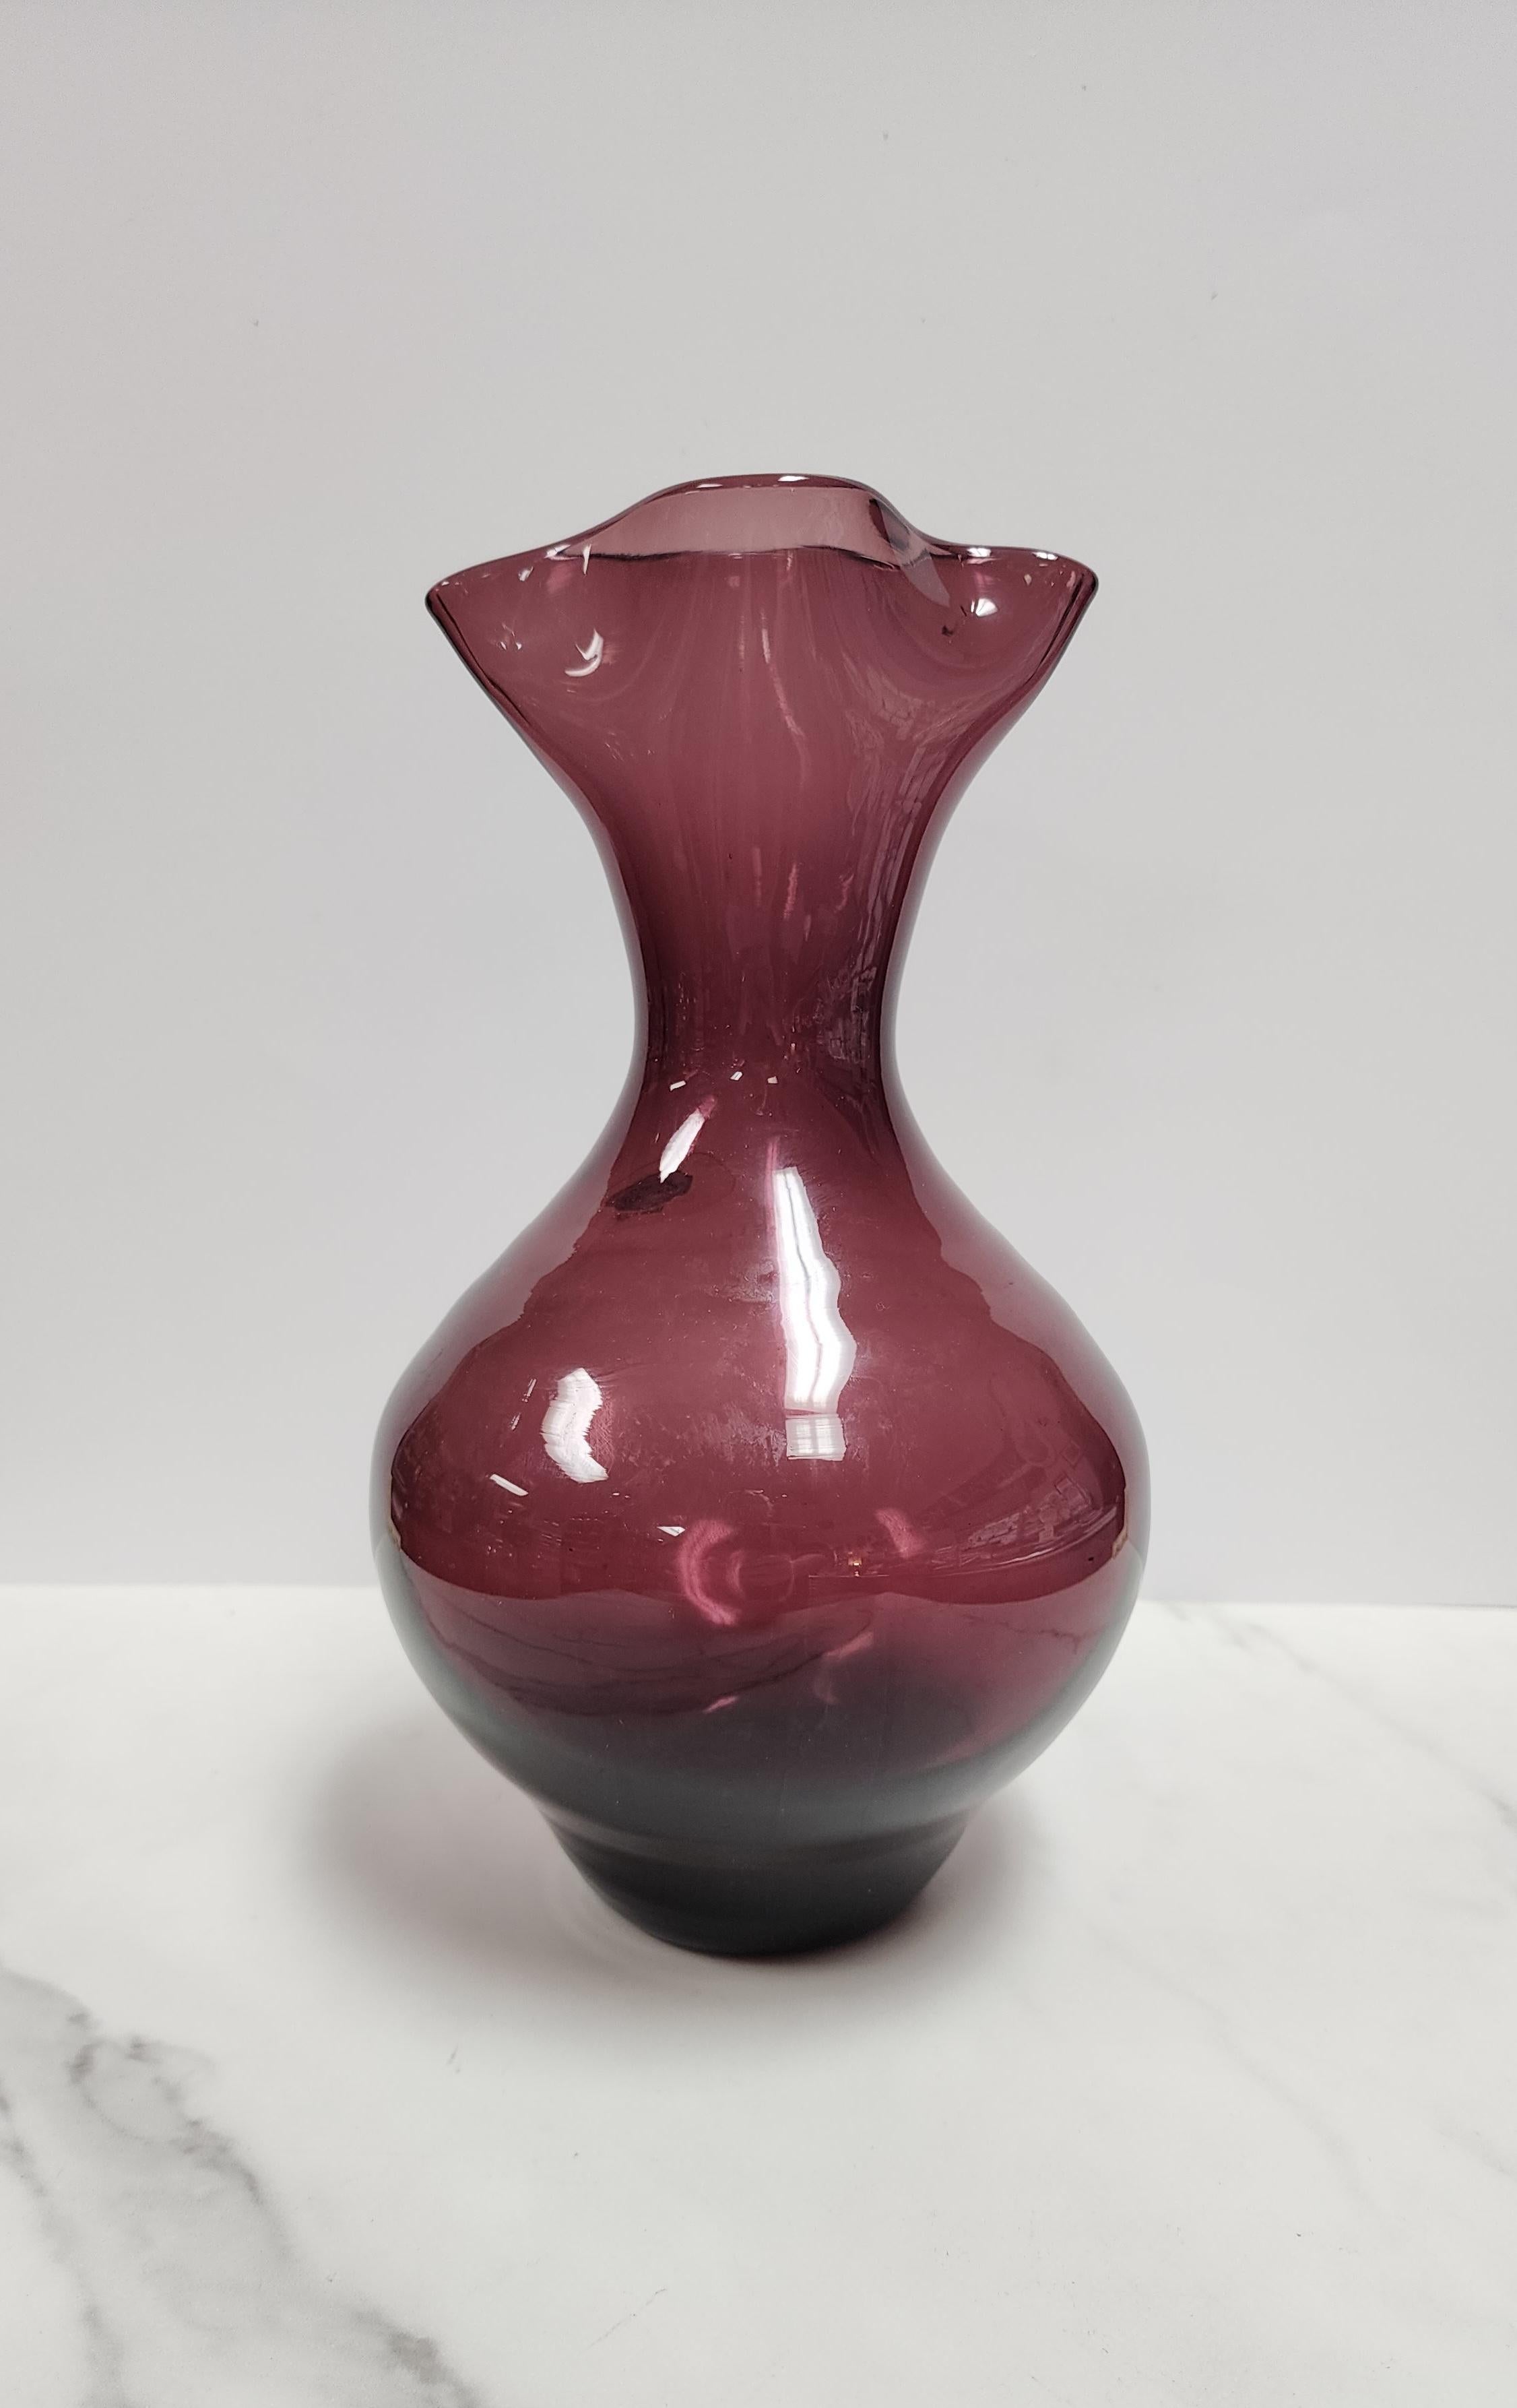 This Blenko amethyst vase is signed on the bottom and still has the original foil tag. The bottom is marked Retro Blenko 2002 and is signed by the artist. It has the pinched spout and is in excellent condition. 
This vase is a gorgeous purple that